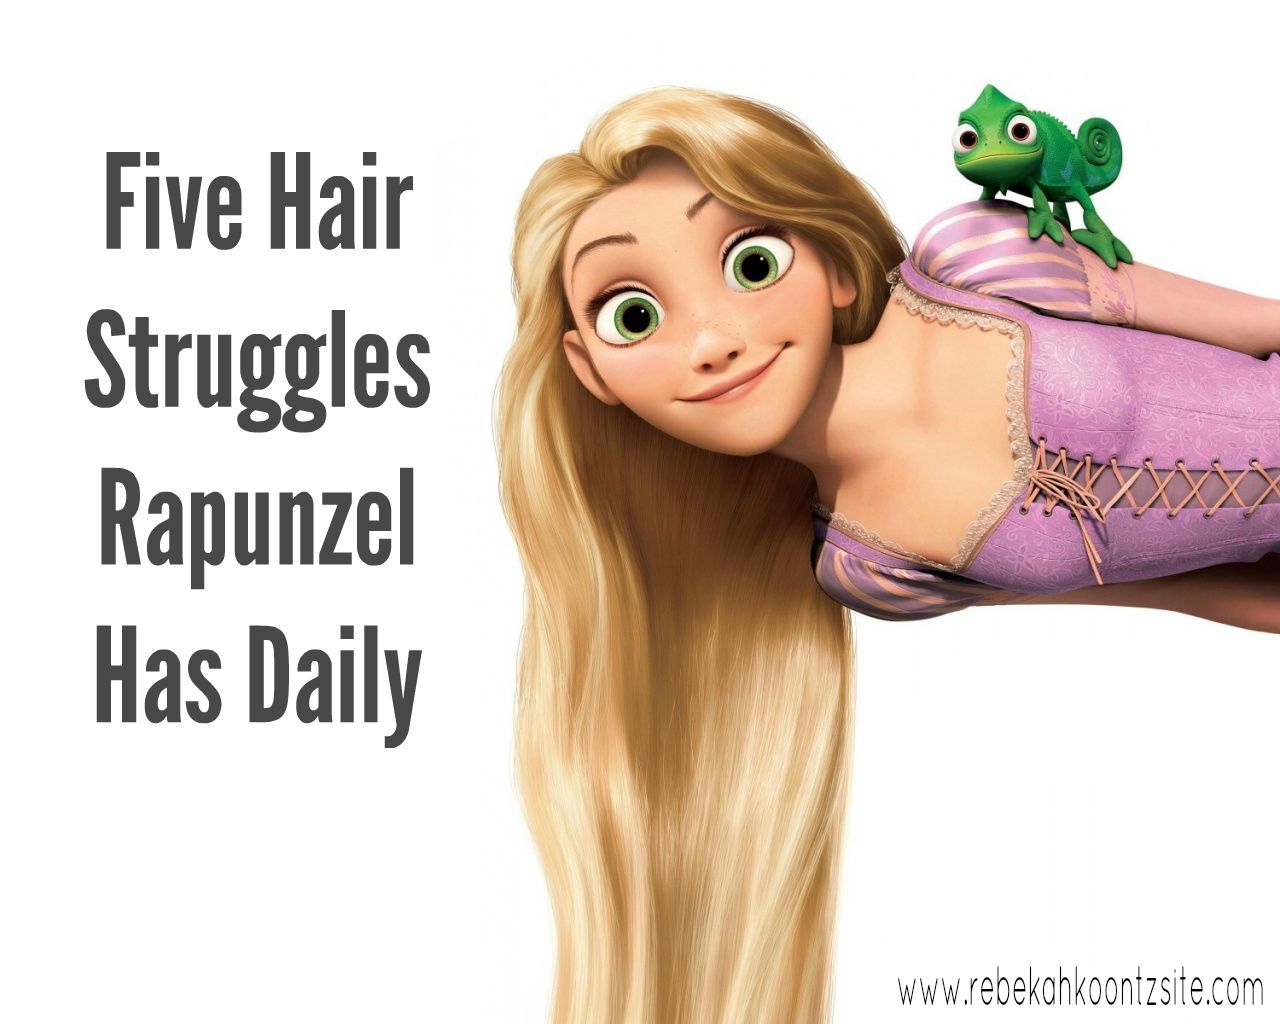 What happens when you cut off Rapunzel's hair in Tangled: Before Ever  After? - Quora